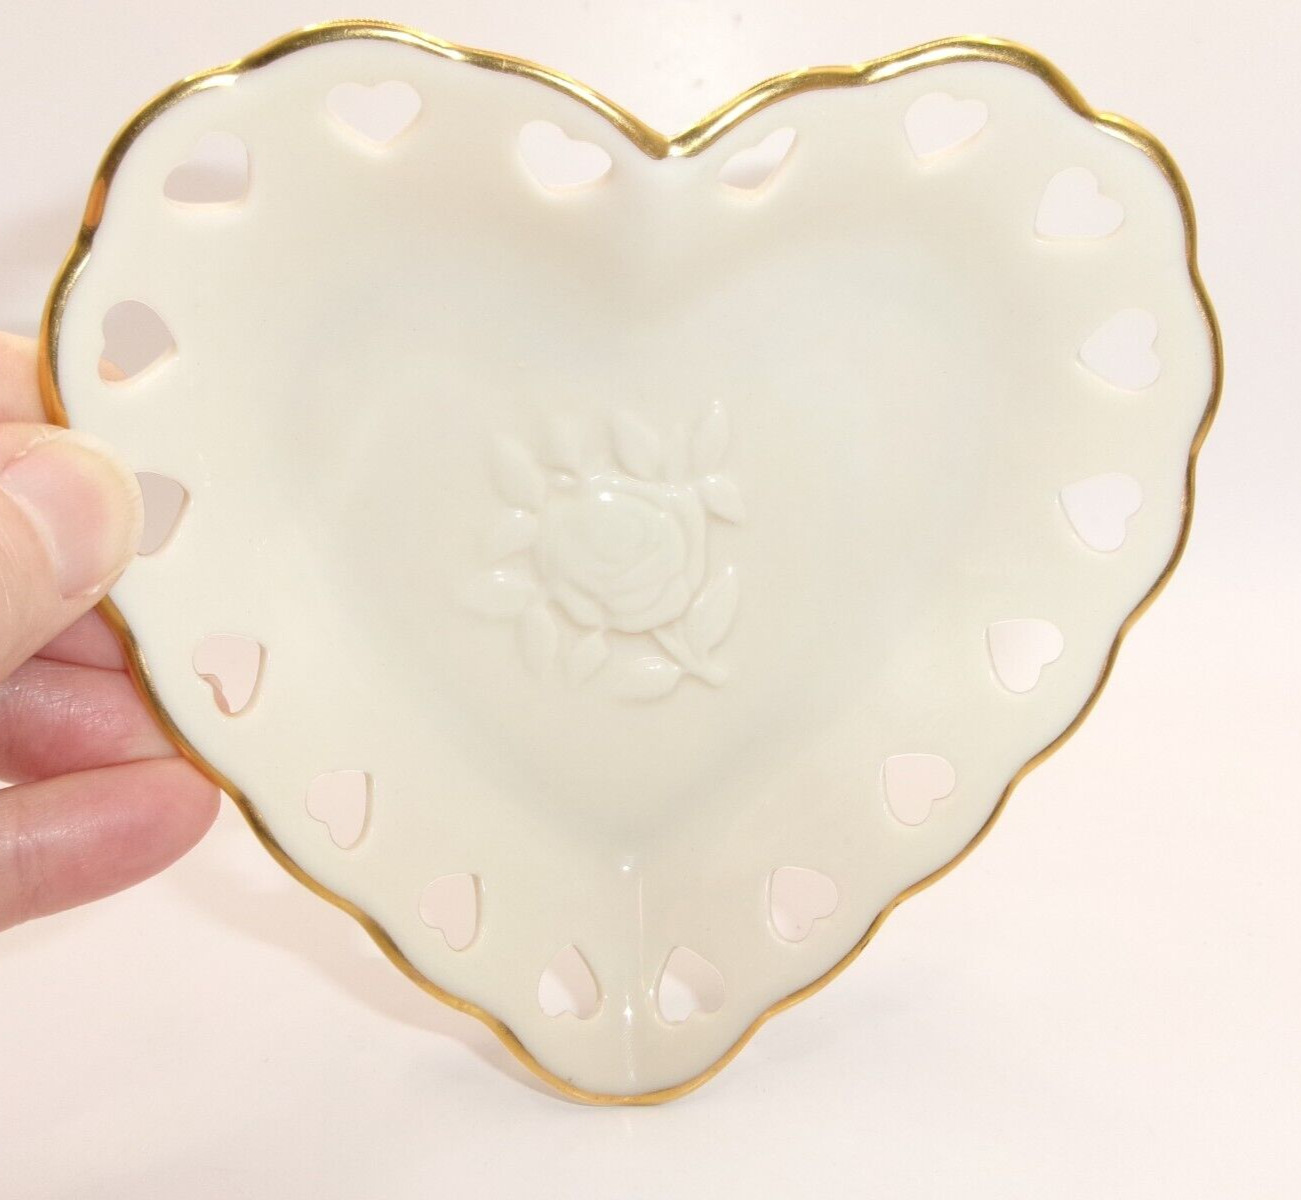 Vintage Lenox Heart Shaped Trinket Dish China Rosebud Collection Reticulated USA